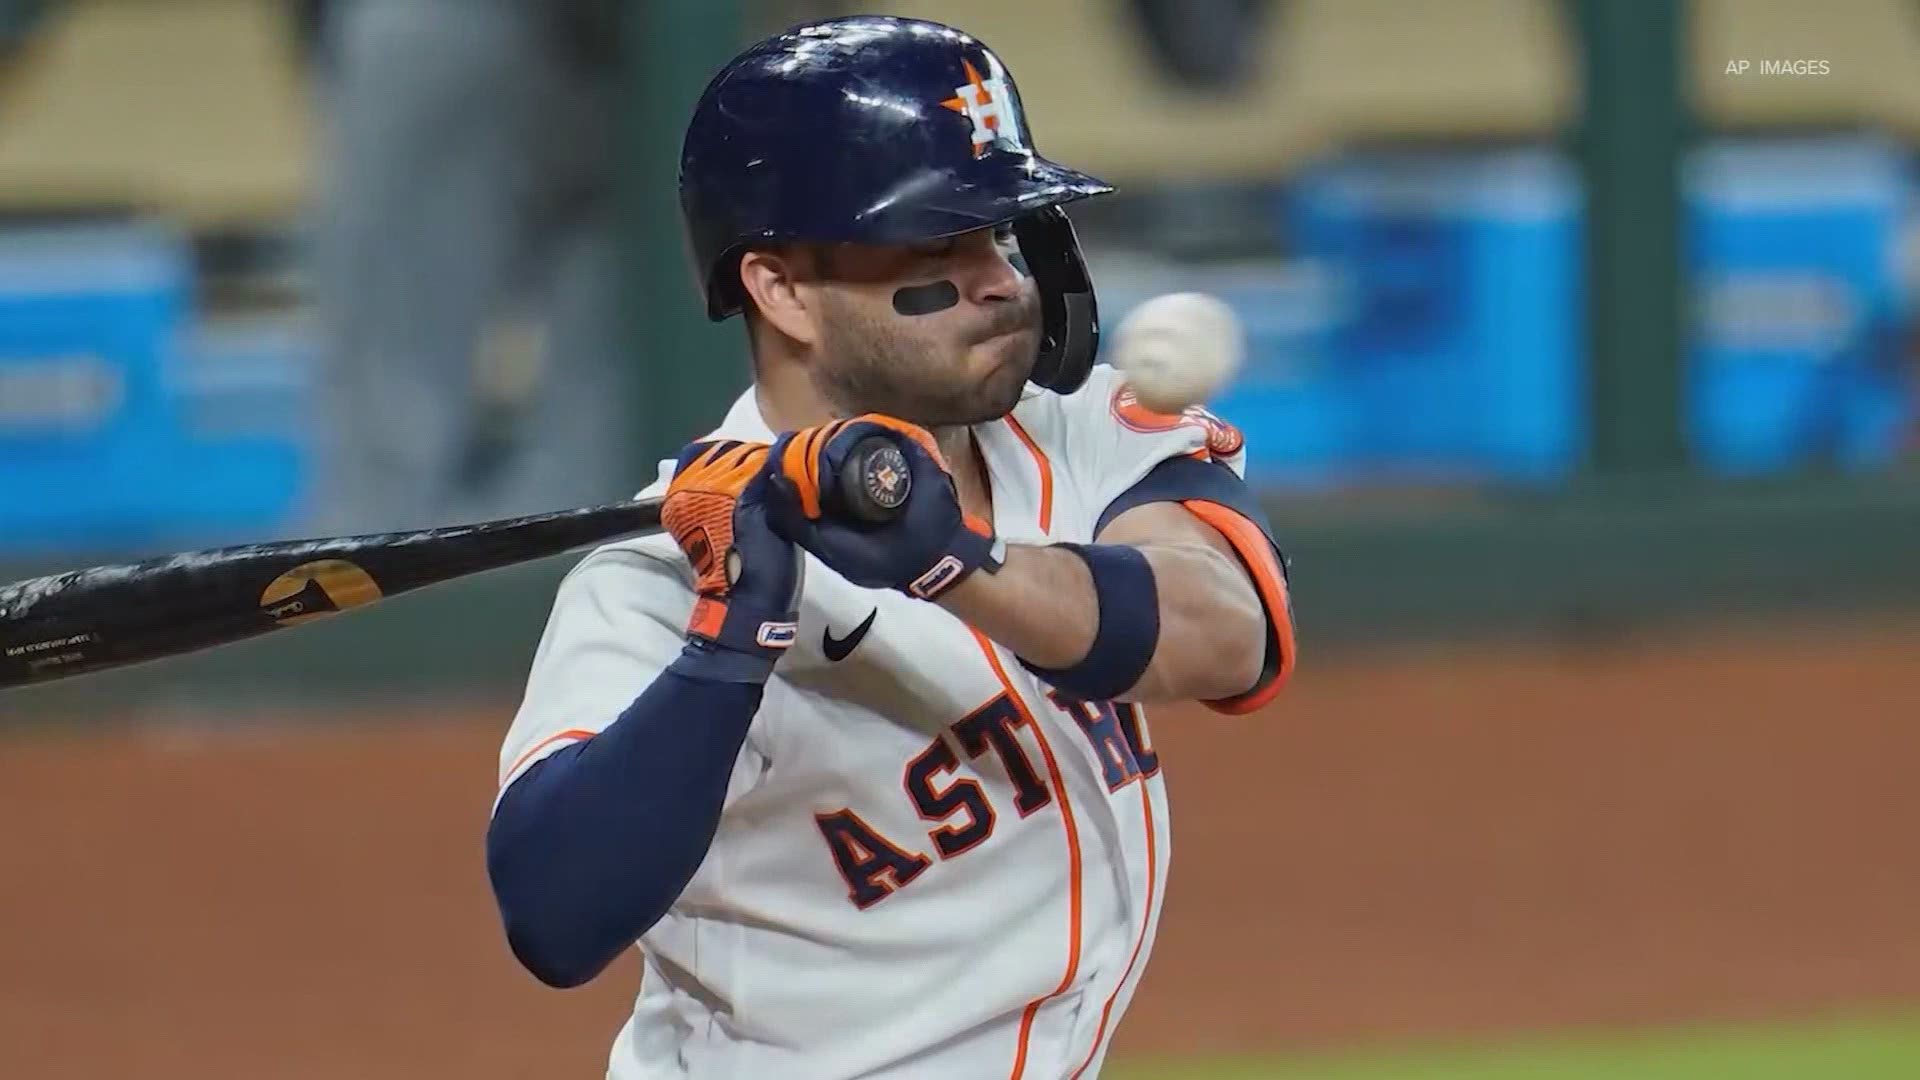 It's the start of a new season for the Astros. A new year means new dreams - maybe a new title? Jason Bristol showing what needs to happen for success this year.